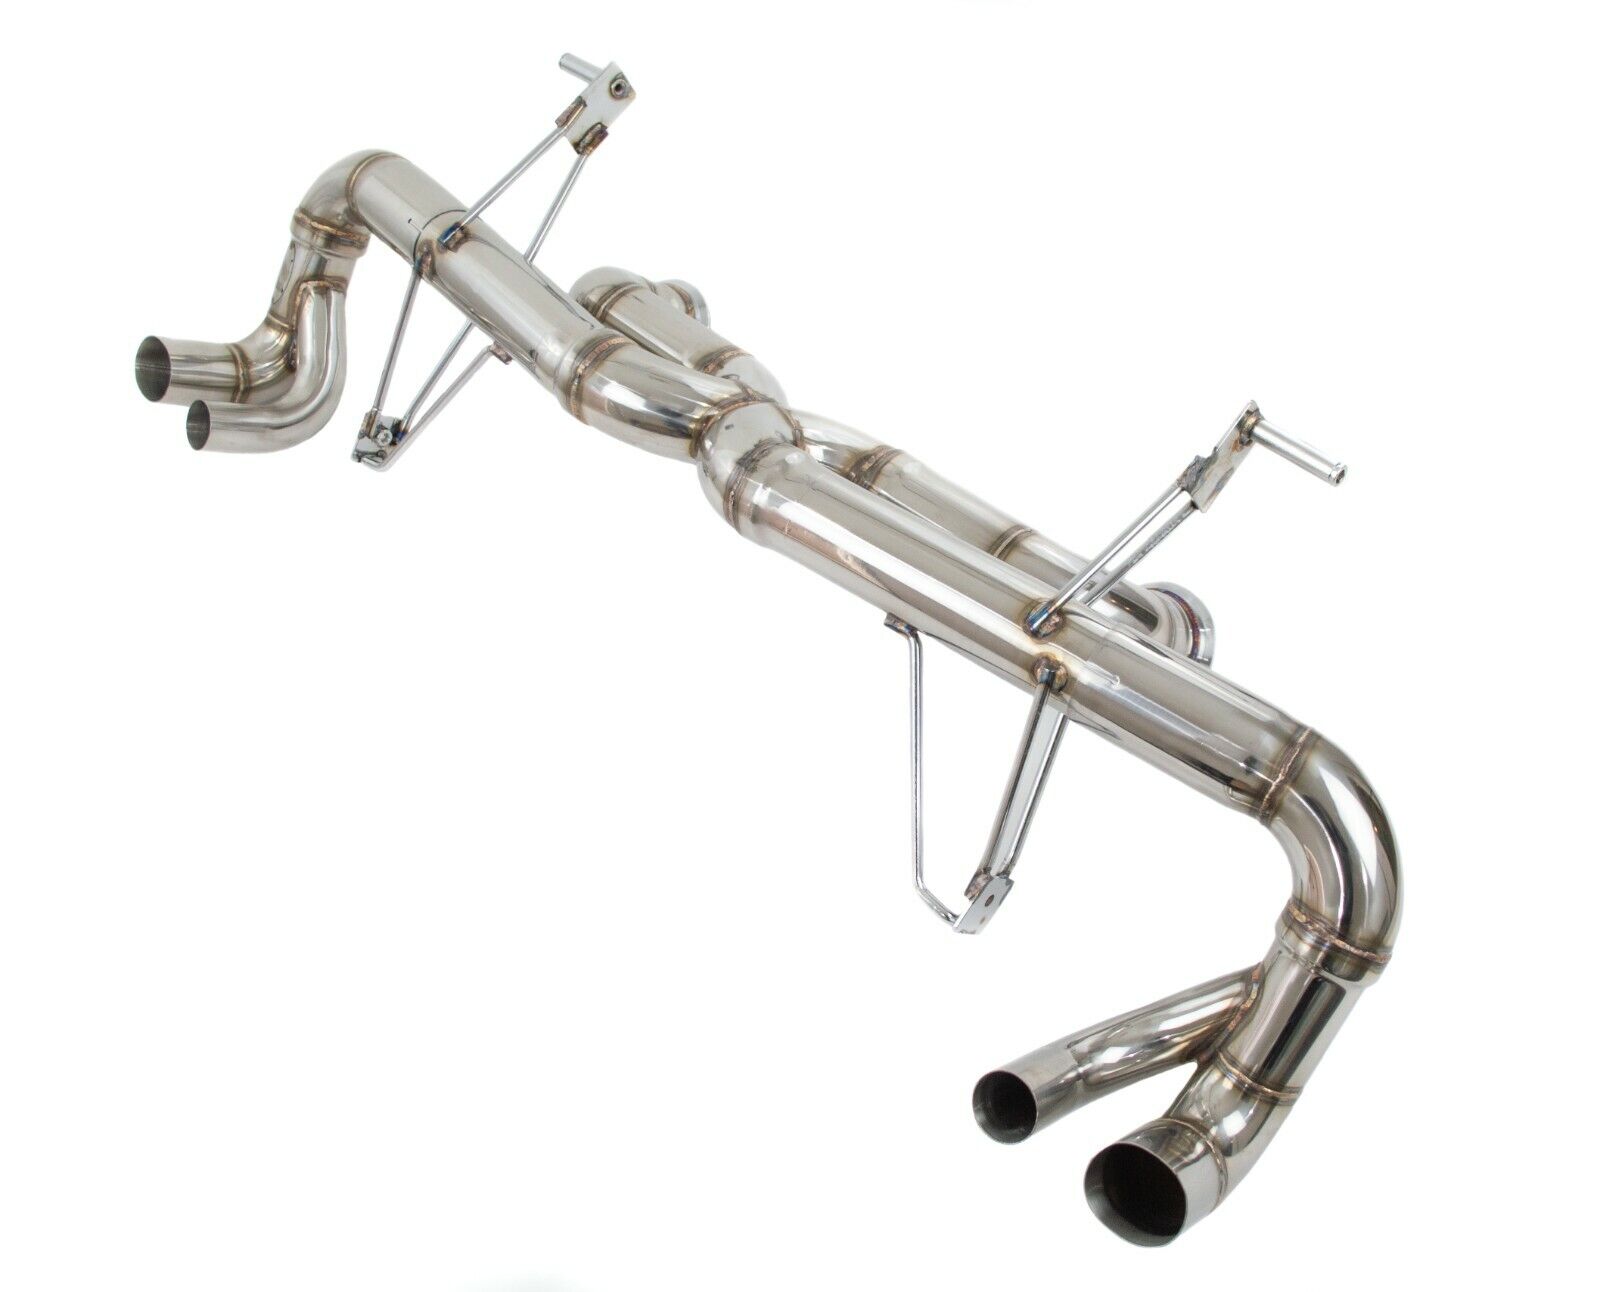 Fits AUDI R8 MK2  5.2L V10 17-20 TOP SPEED PRO-1  76MM  X-Pipe Exhaust System